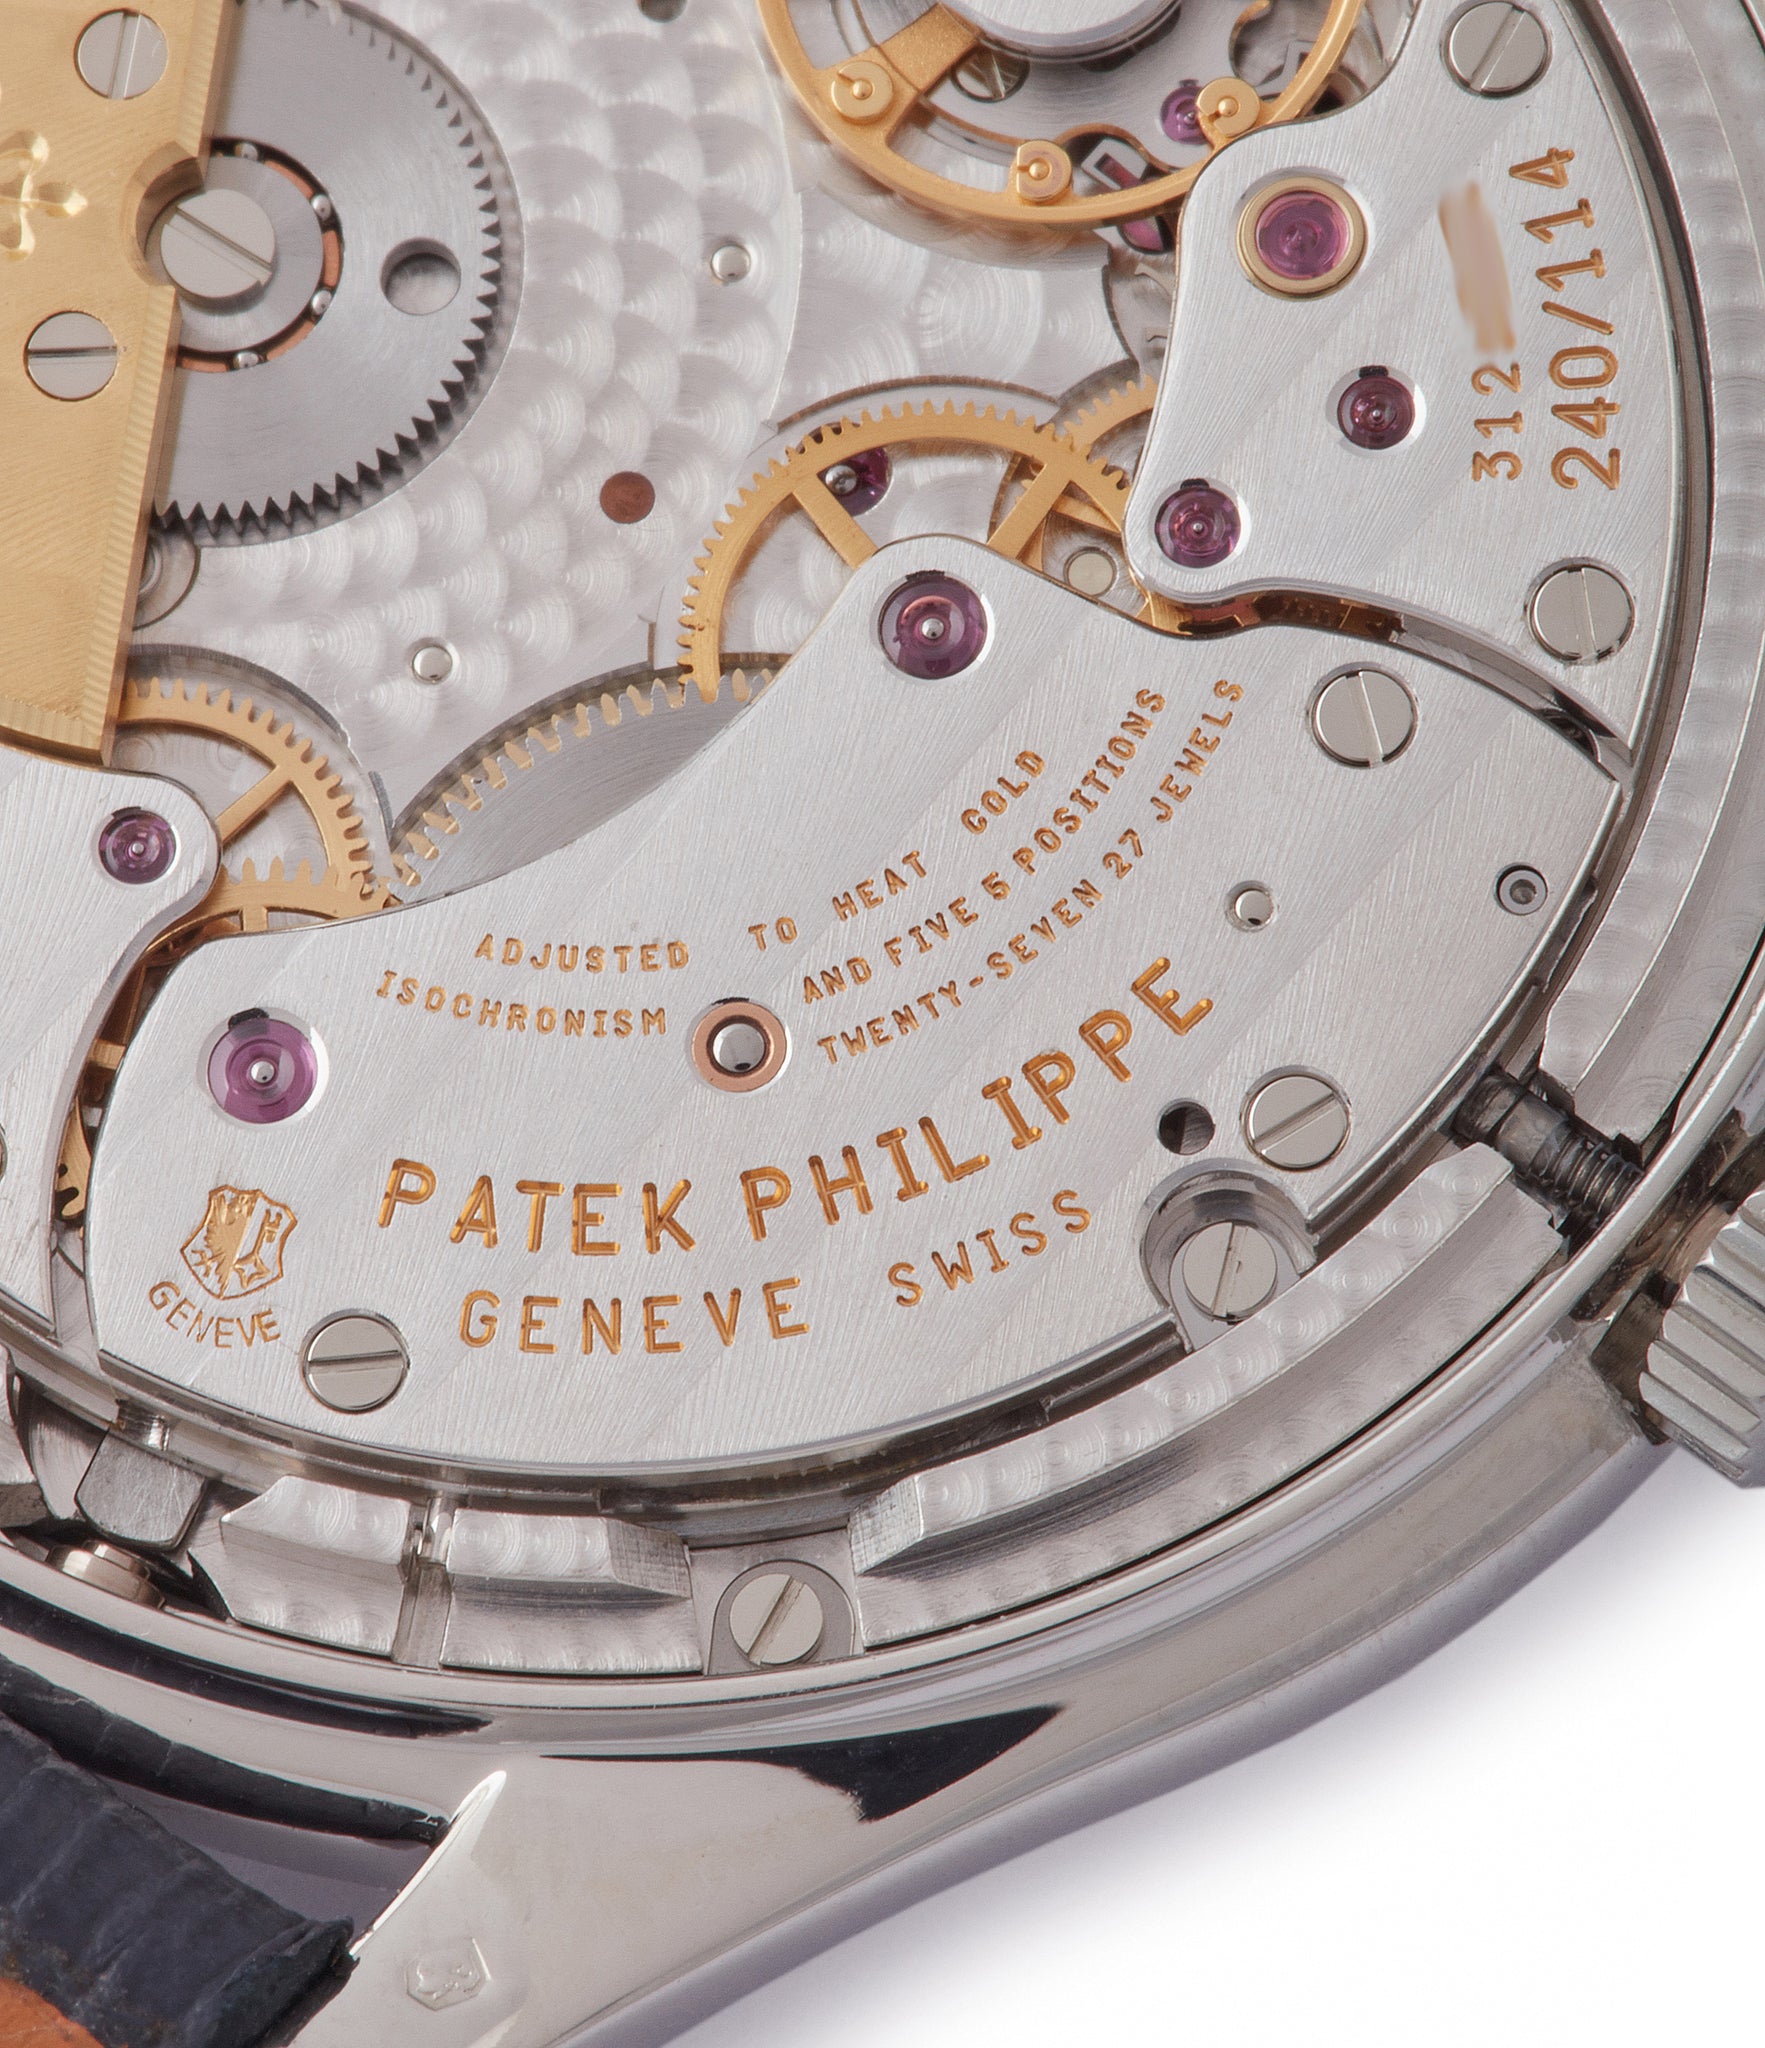 movement Patek Philippe 3940P platinum perpetual calendar rare dress watch full set for sale online at A Collected Man London UK specialist of rare watches